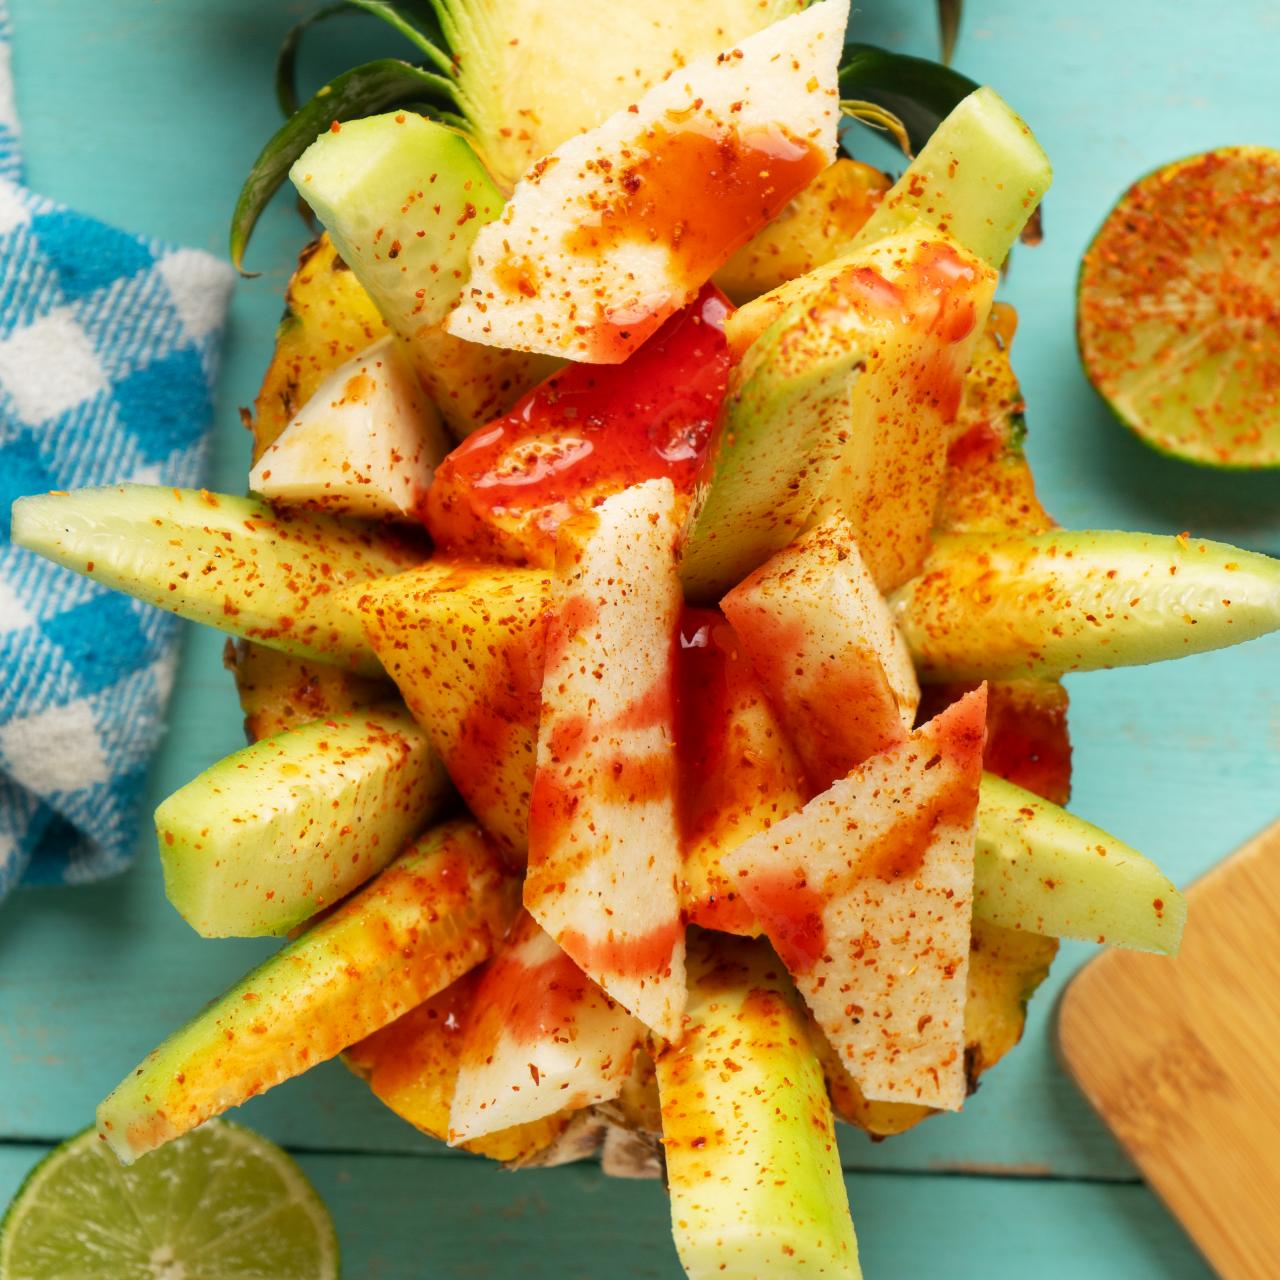 Tajin - A Local Mexican Condiment You Cannot Miss